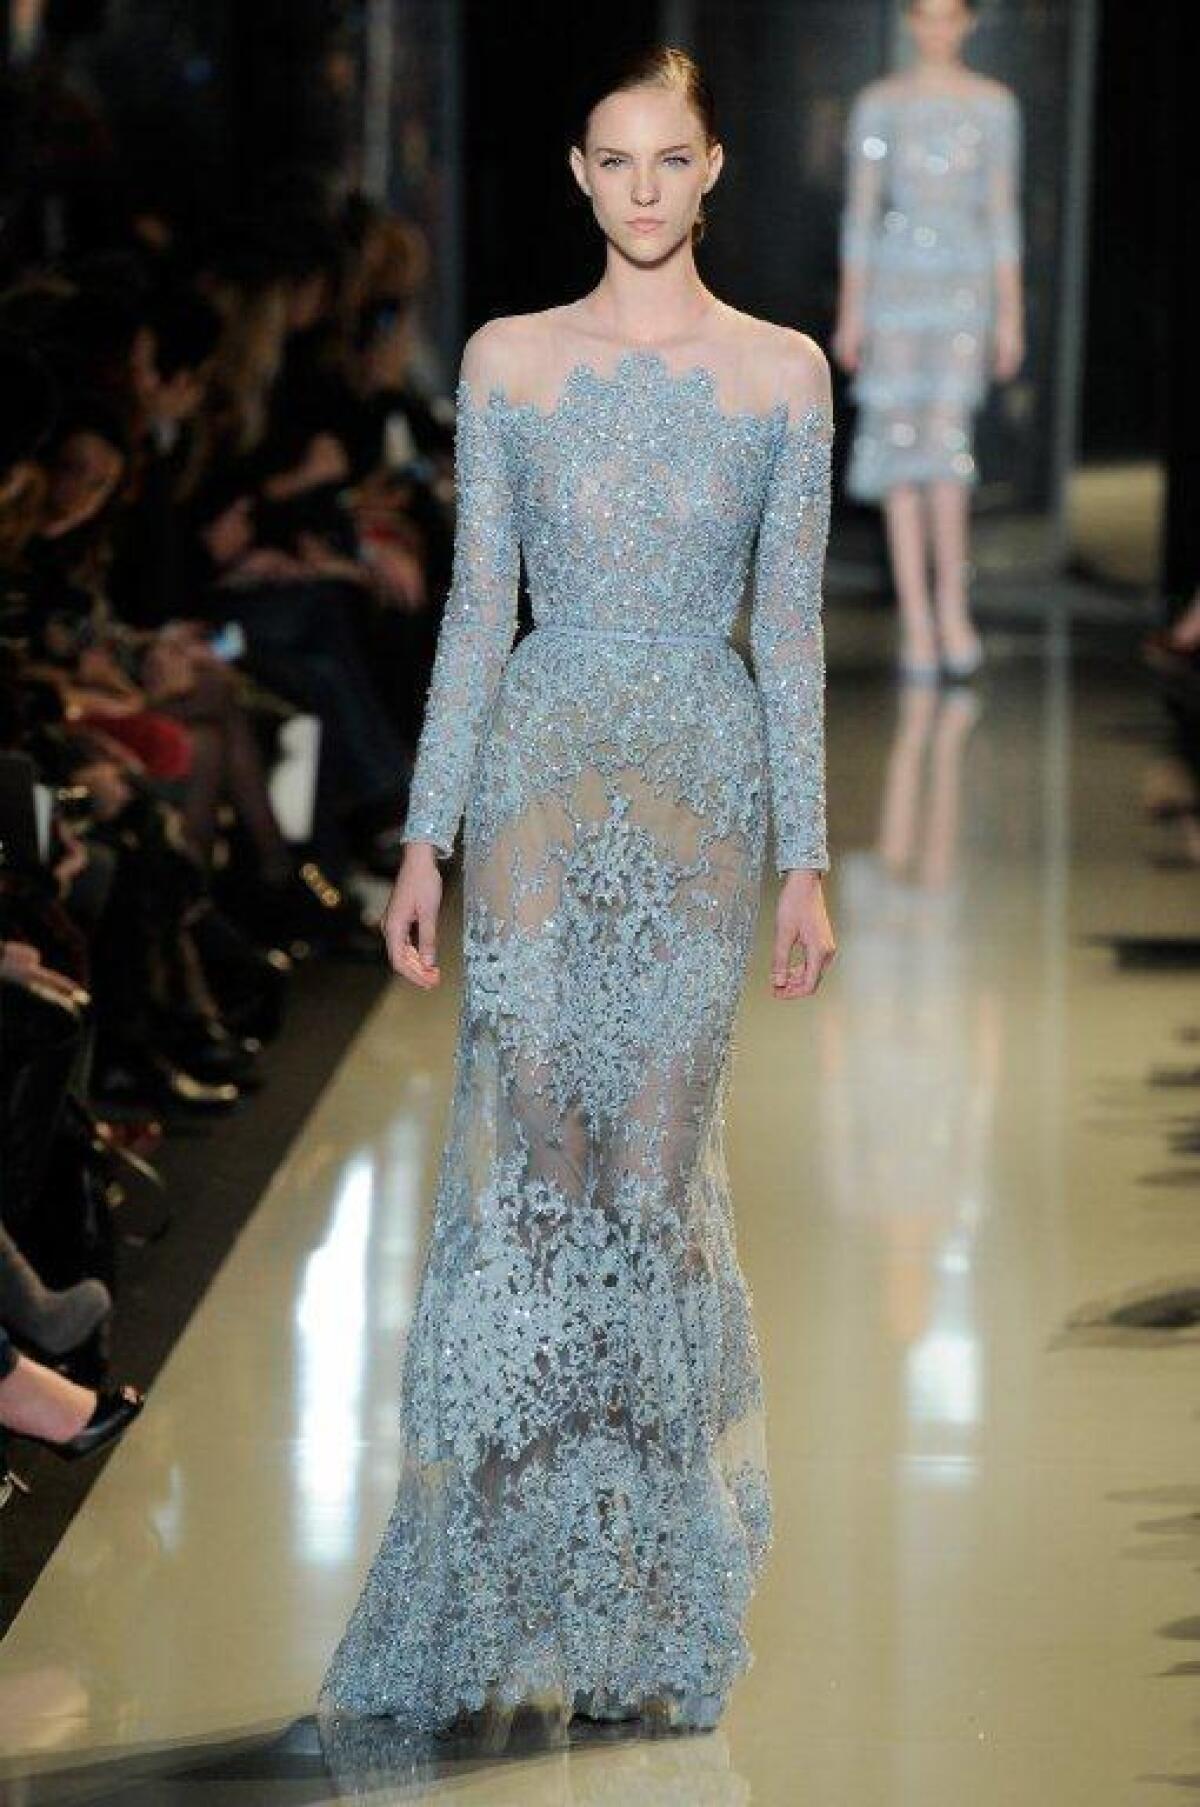 A model shows off a red-carpet-worthy Elie Saab gown during the Paris haute couture shows.